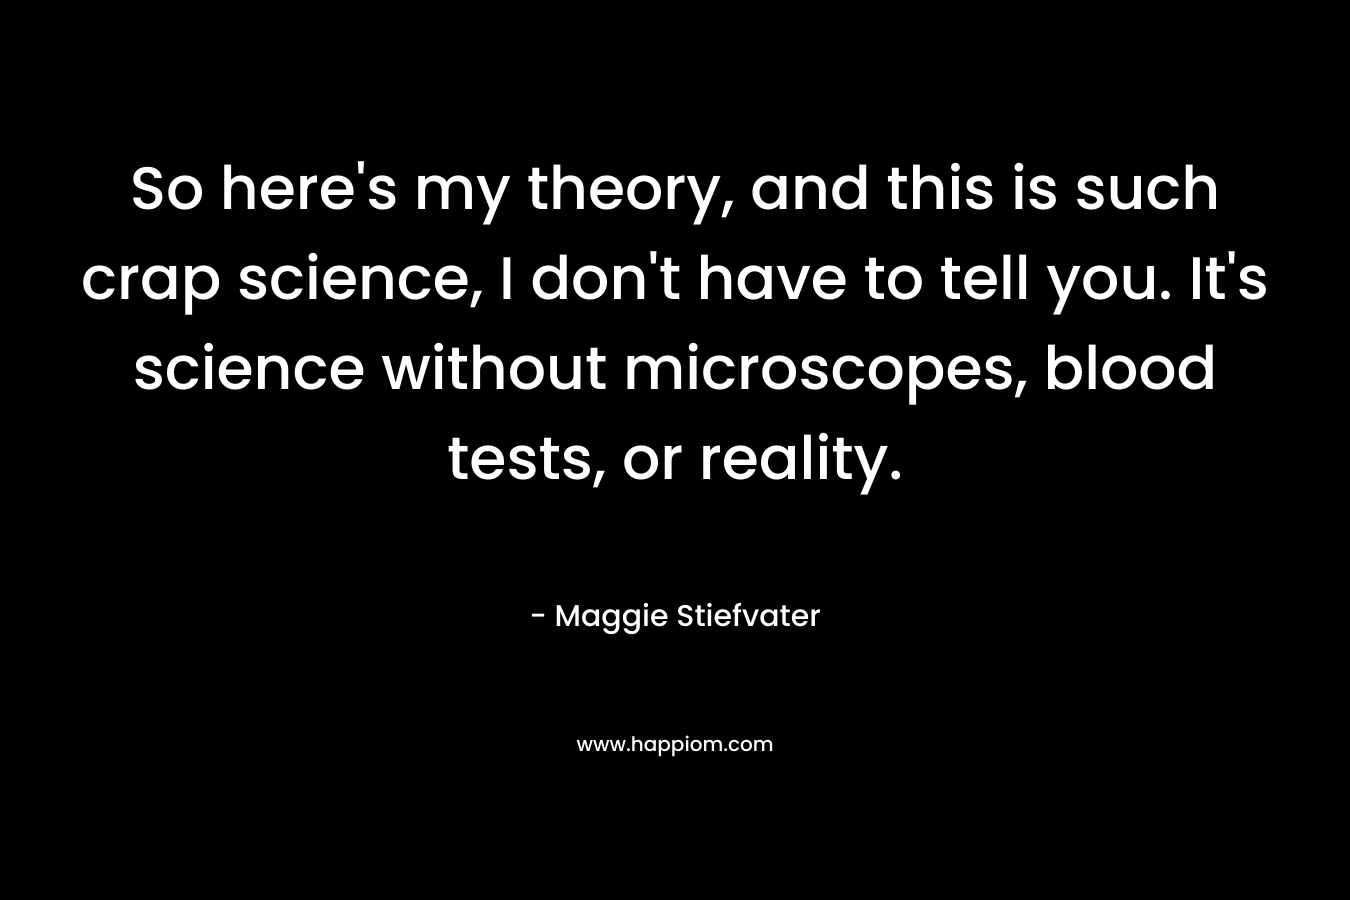 So here's my theory, and this is such crap science, I don't have to tell you. It's science without microscopes, blood tests, or reality.